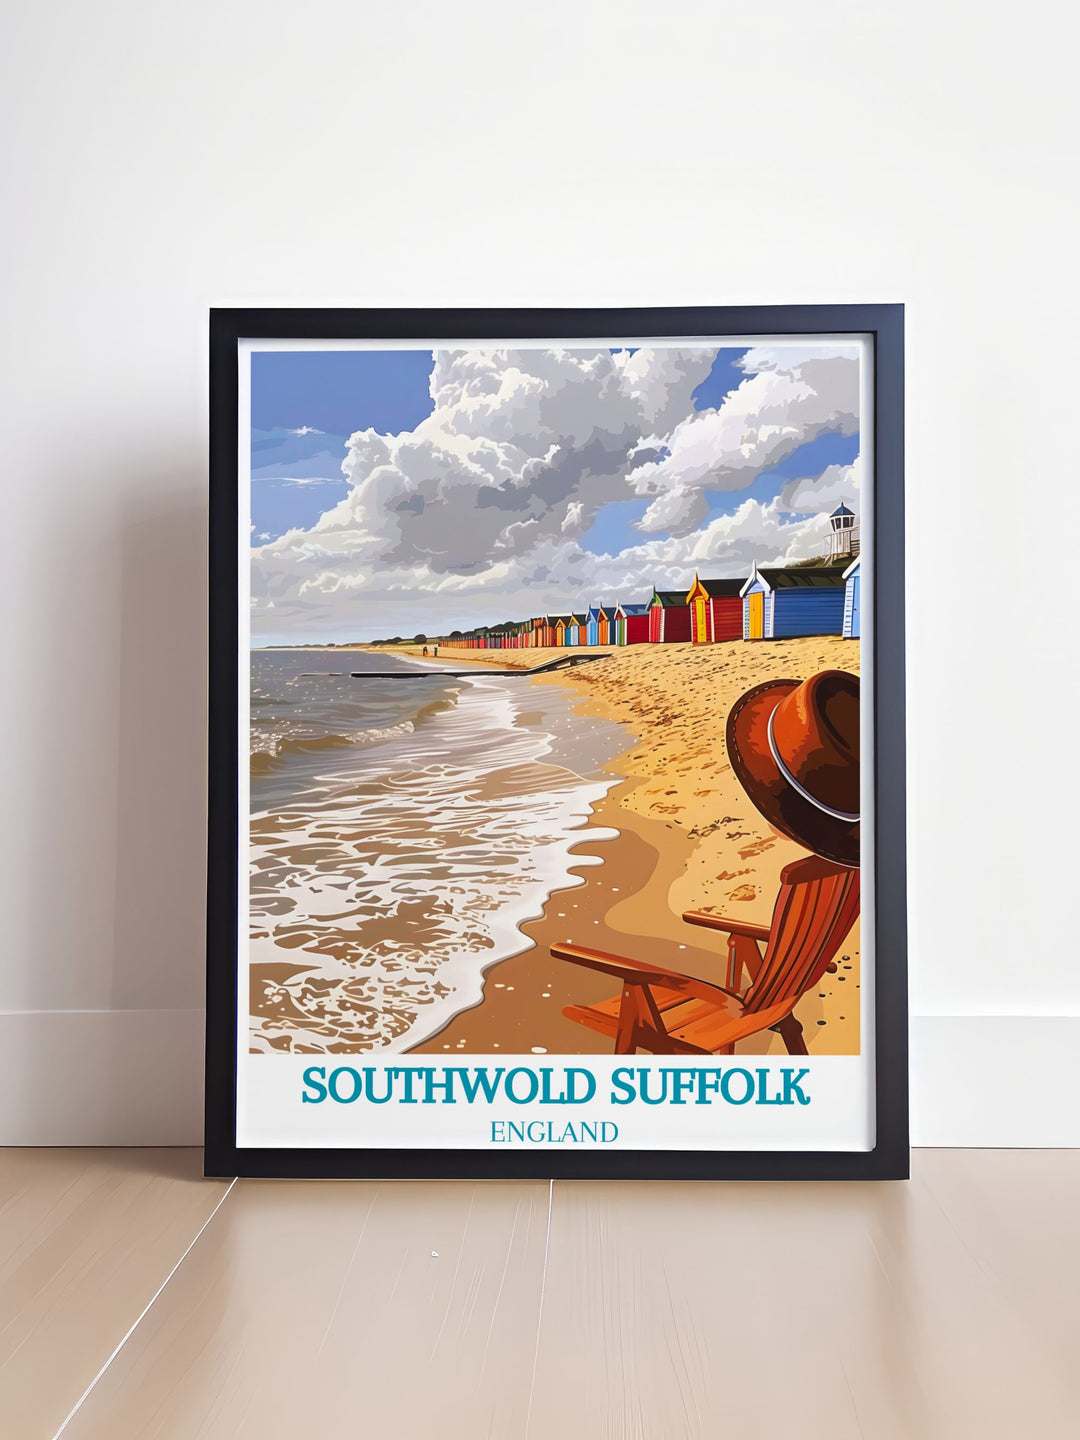 Immerse yourself in the scenic wonders of Southwold with this travel poster, featuring the sandy shores and the vibrant coastal landscape.